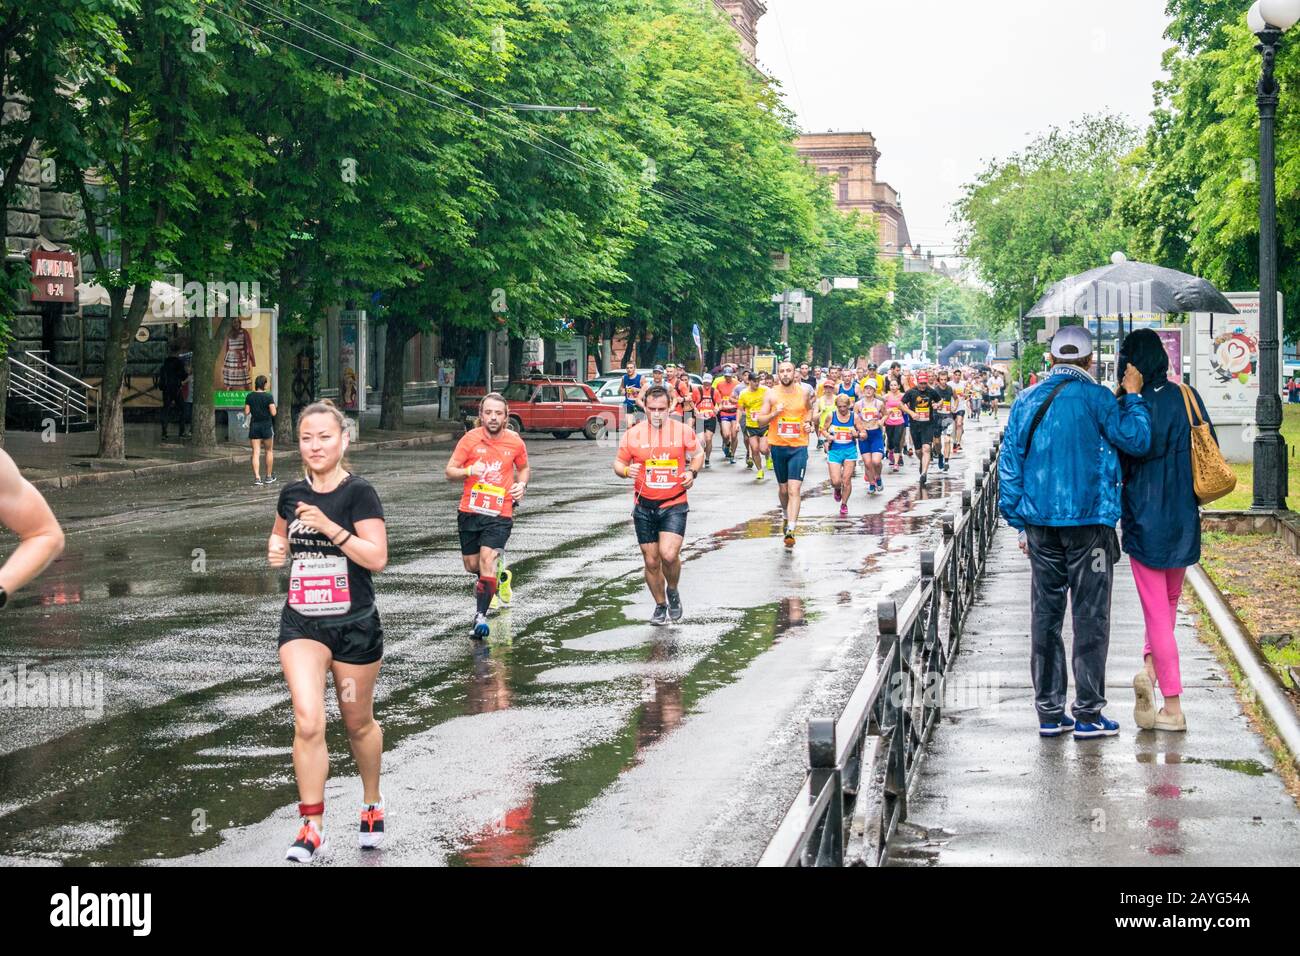 Dnepr, Ukraine - May 20, 2018: Athletes run a marathon through the streets of the city. Promoting a healthy lifestyle. Stock Photo